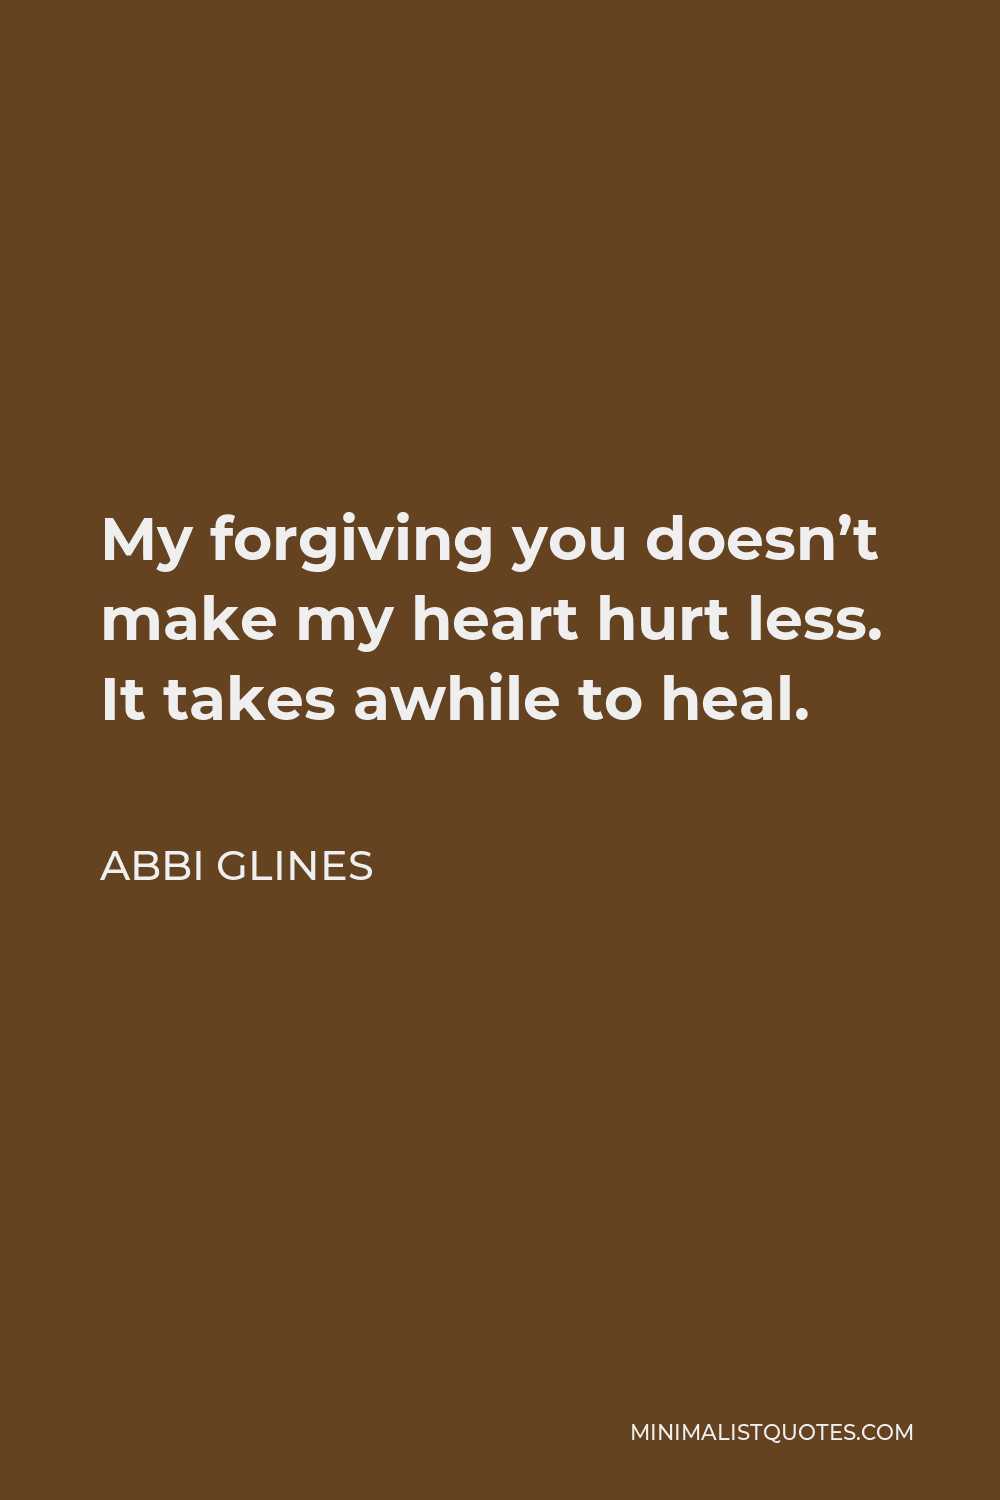 Abbi Glines Quote - My forgiving you doesn’t make my heart hurt less. It takes awhile to heal.